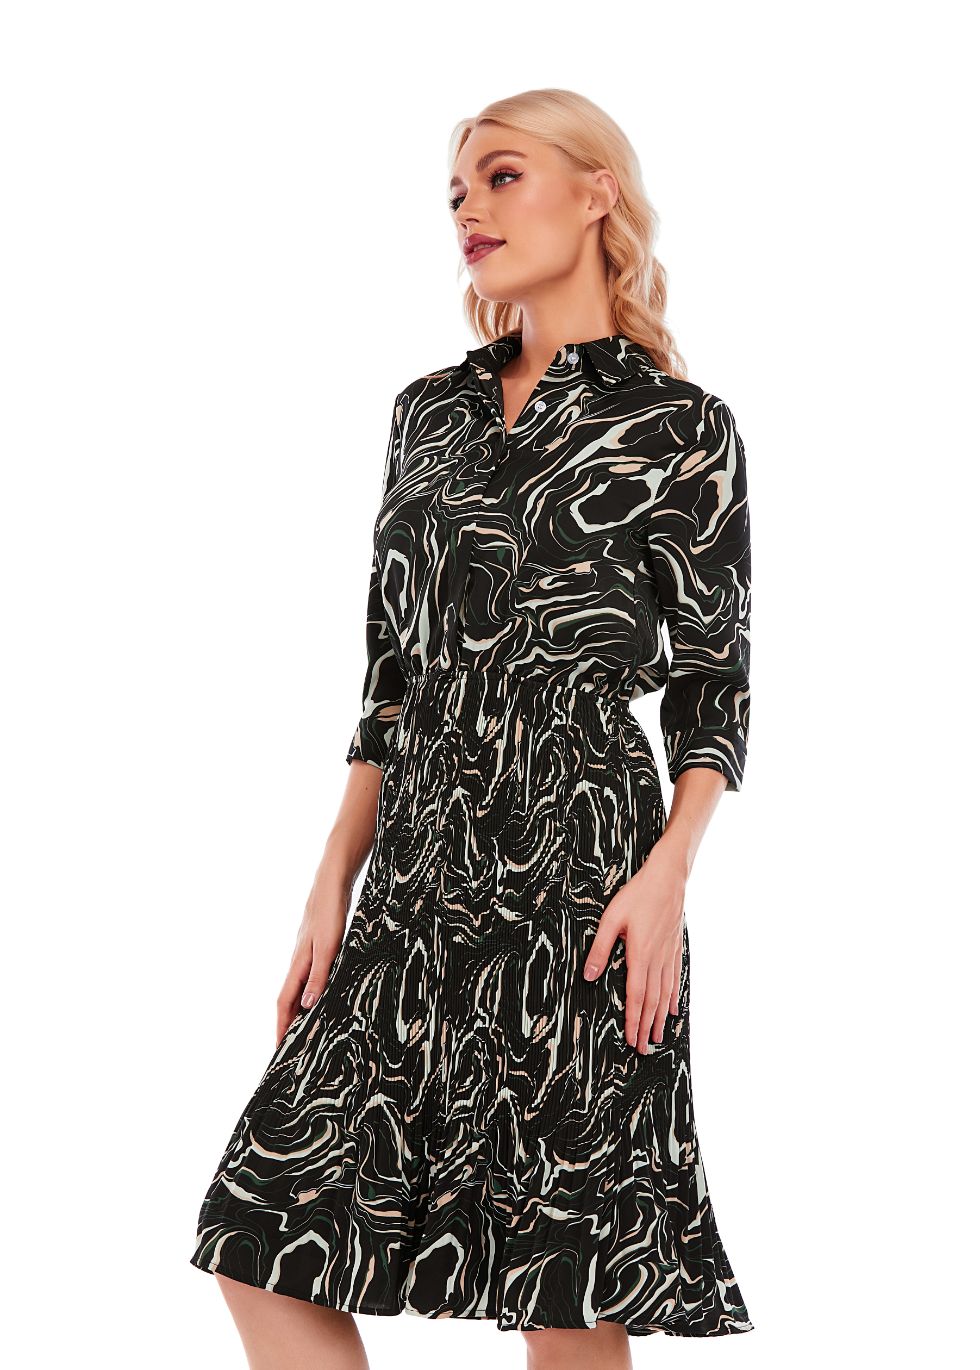 Micro Pleated Skirt Print Dress with 3/4 Sleeve and Button Down Top - seilerlanguageservices